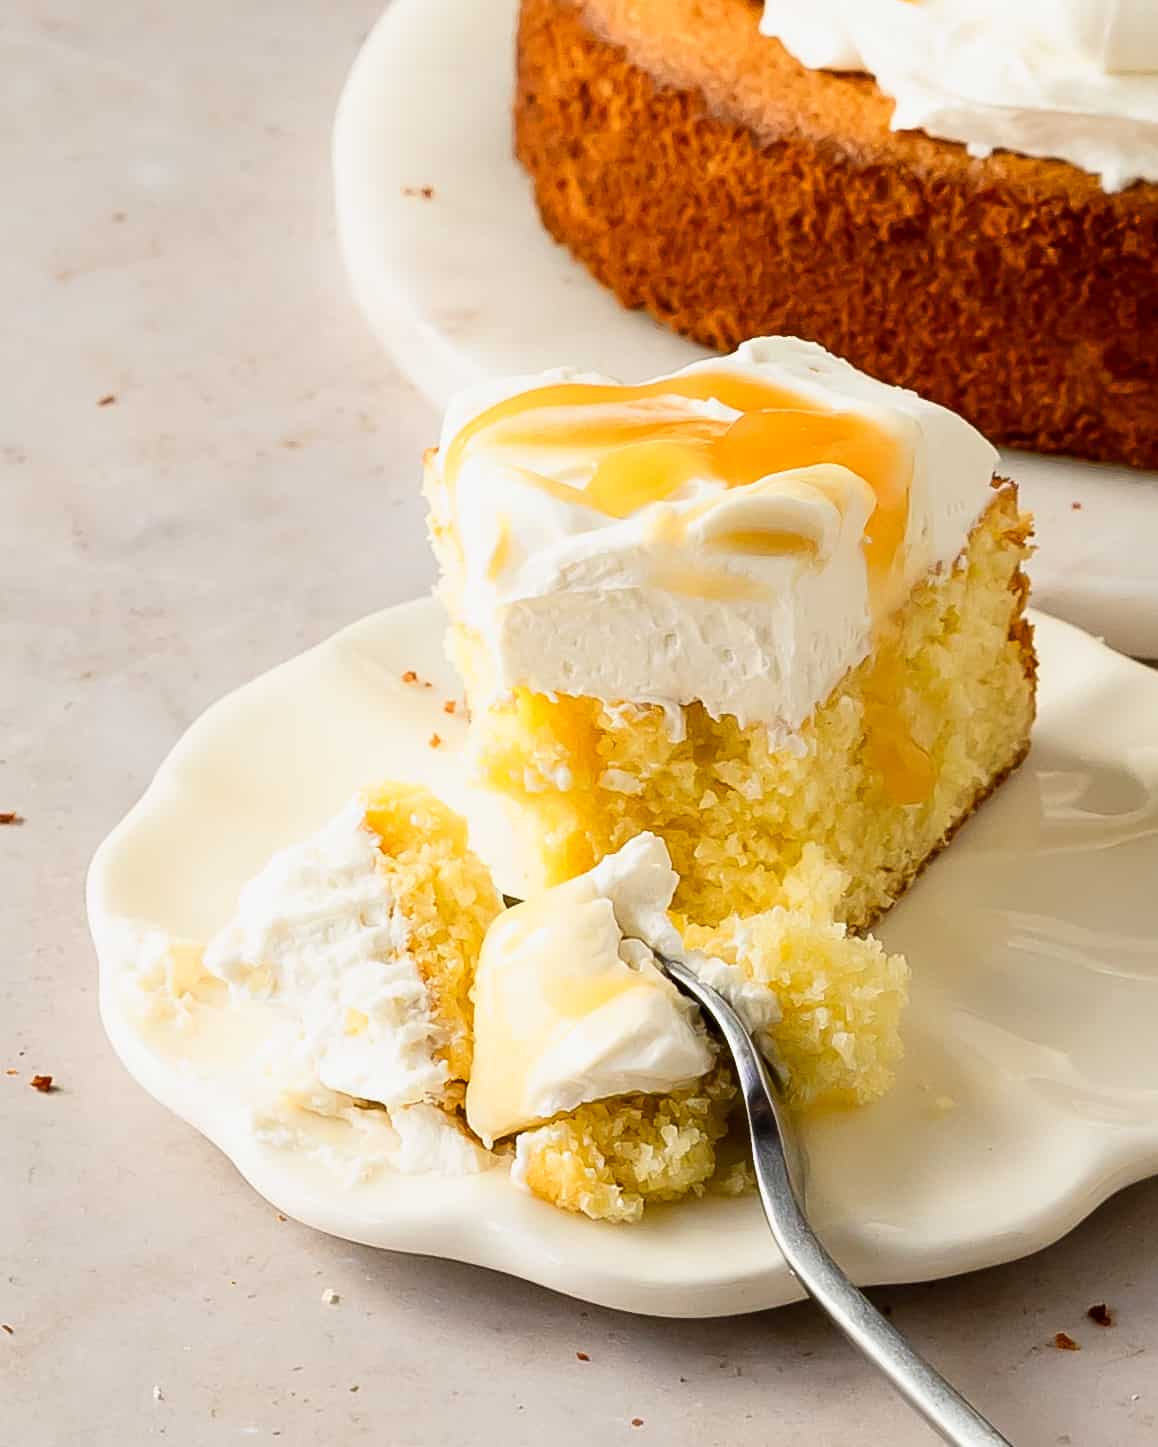  Limoncello mascarpone cake is a deliciously soft and tender lemon cake infused with limoncello liqueur flavor. This Italian lemon cake is topped with a rich and creamy mascarpone frosting and tart lemon curd. Make this limoncello cake anytime you need a simple, but stunning dessert.